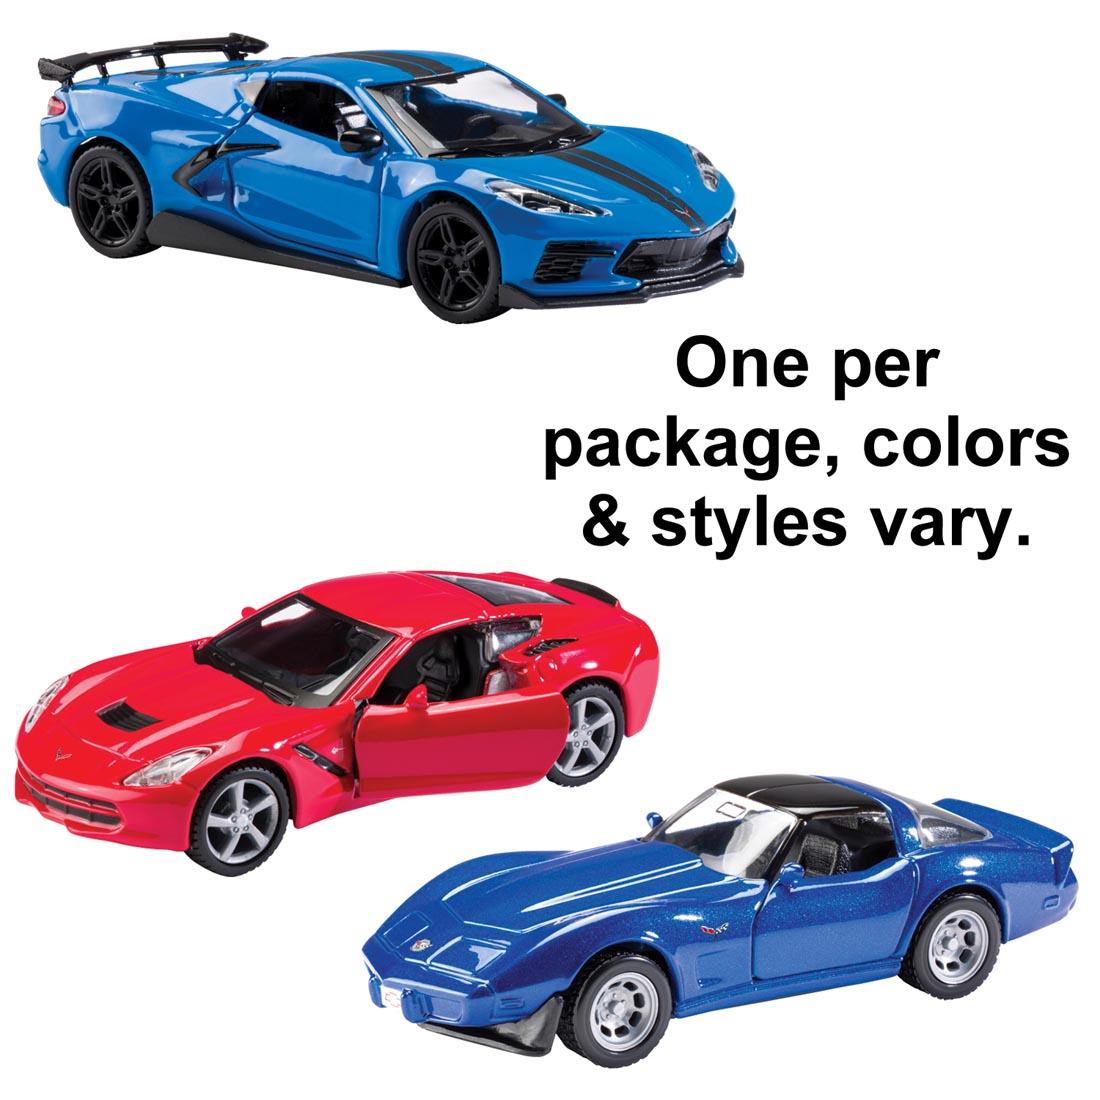 Three different Corvette Pull-Back Toys with the text One per package, colors & styles vary.